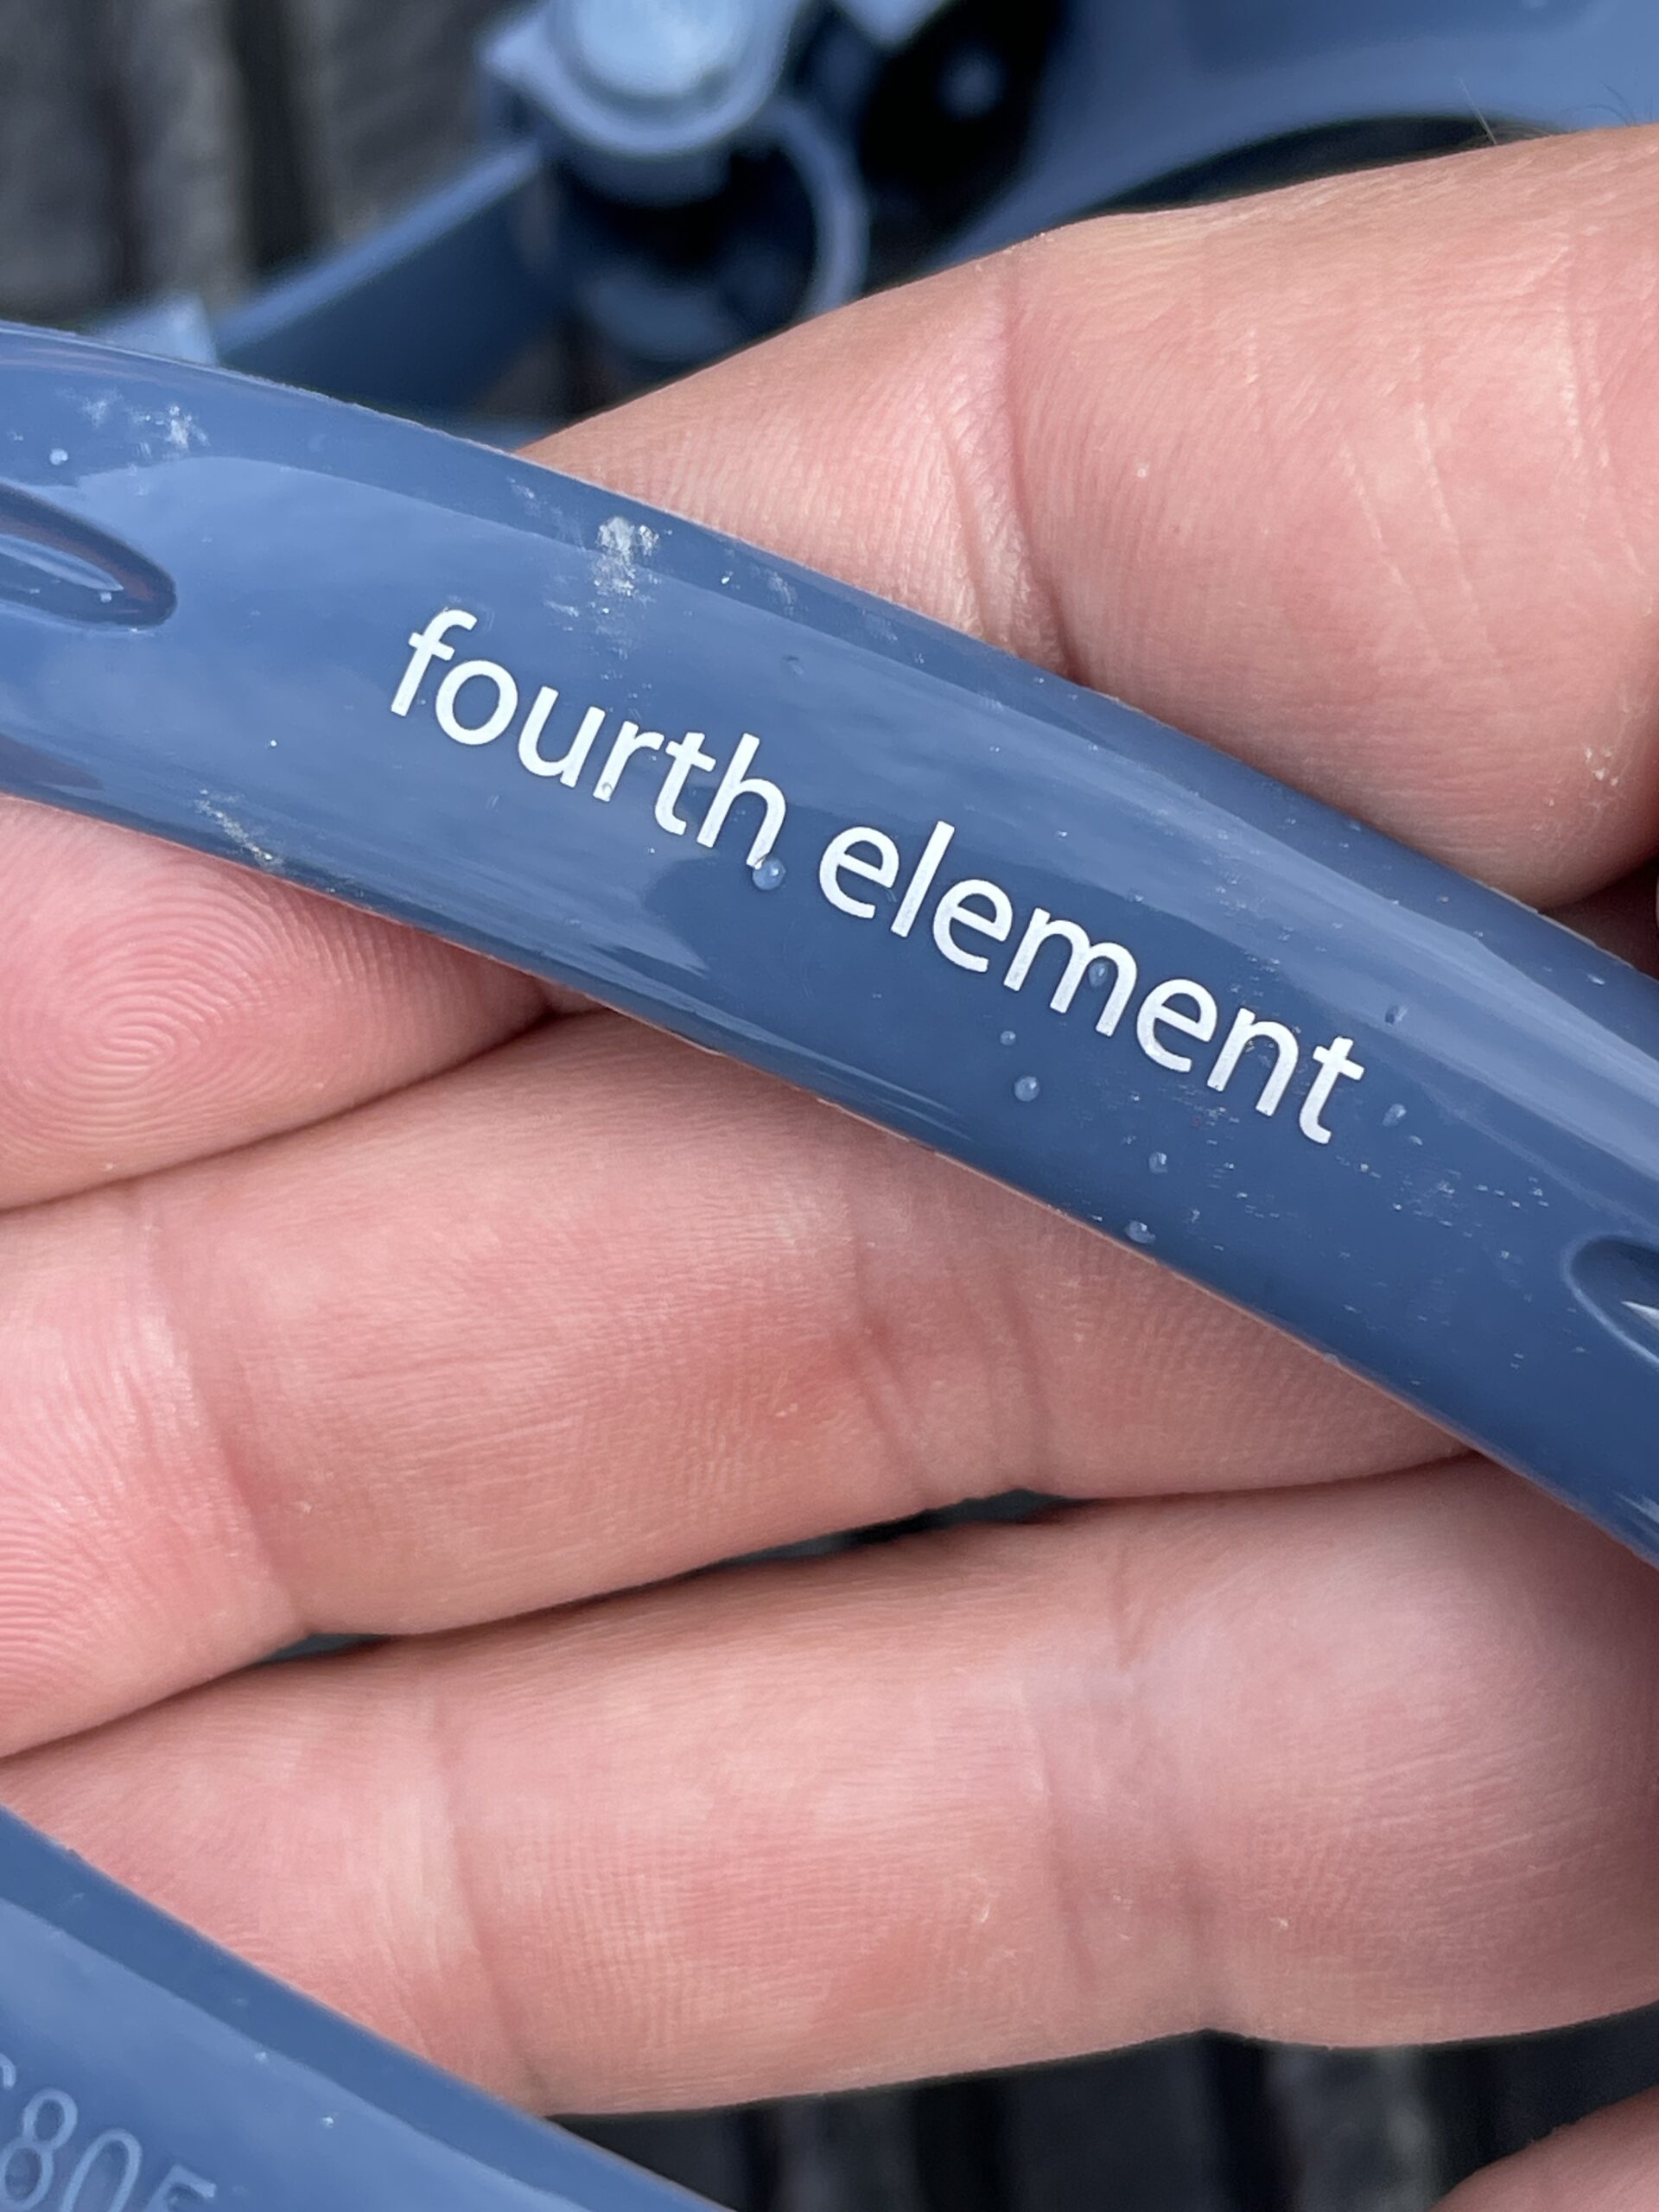 The Seeker strap features Fourth Element branding too